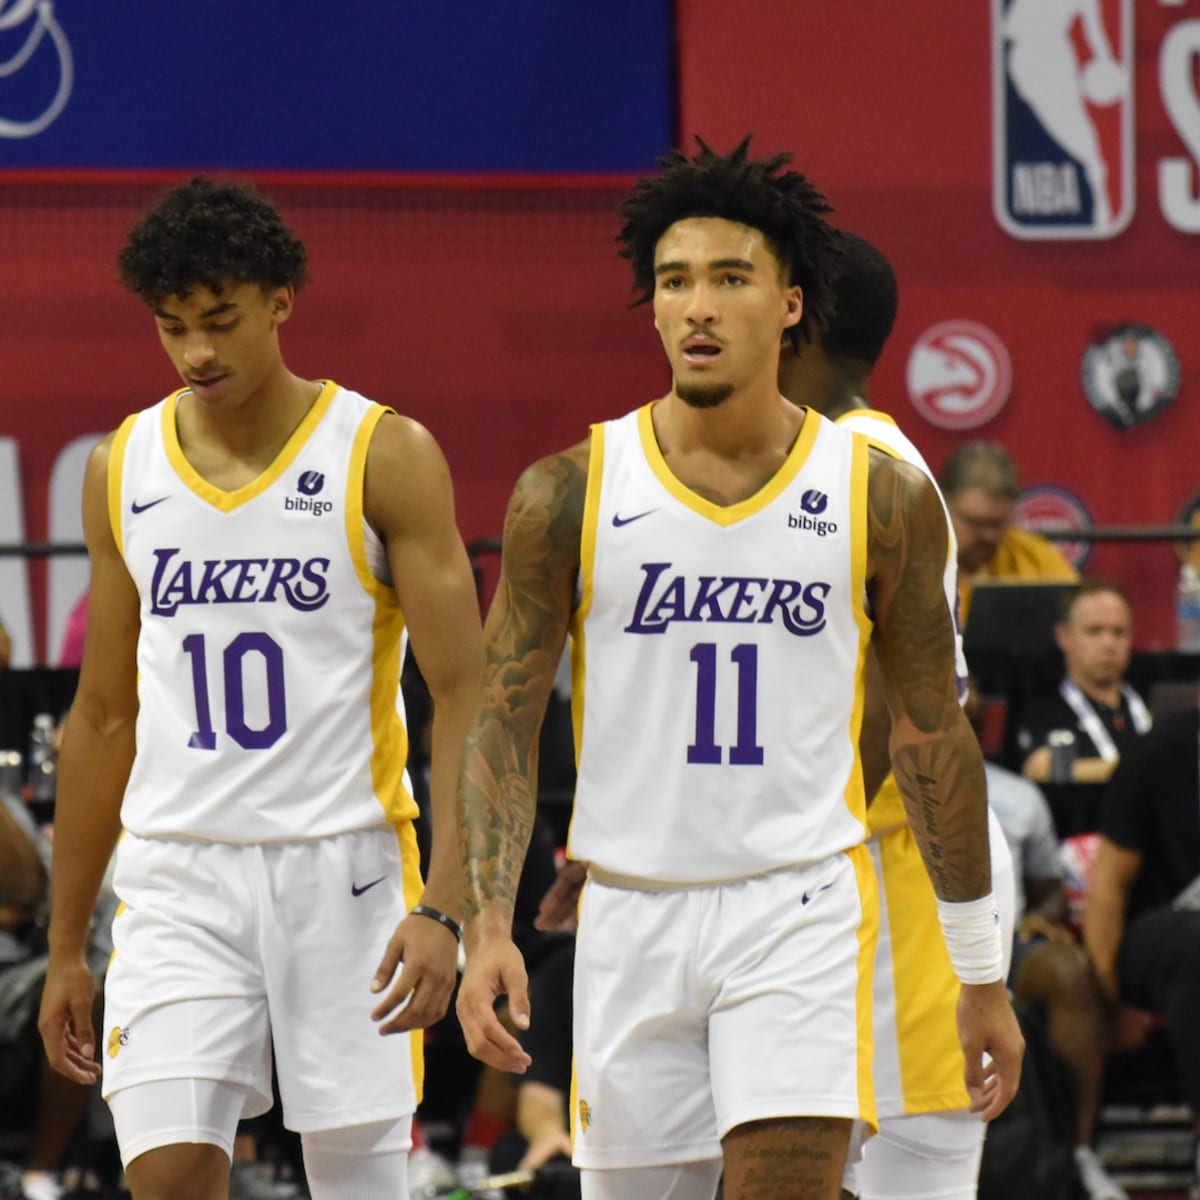 lakers summer league jersey